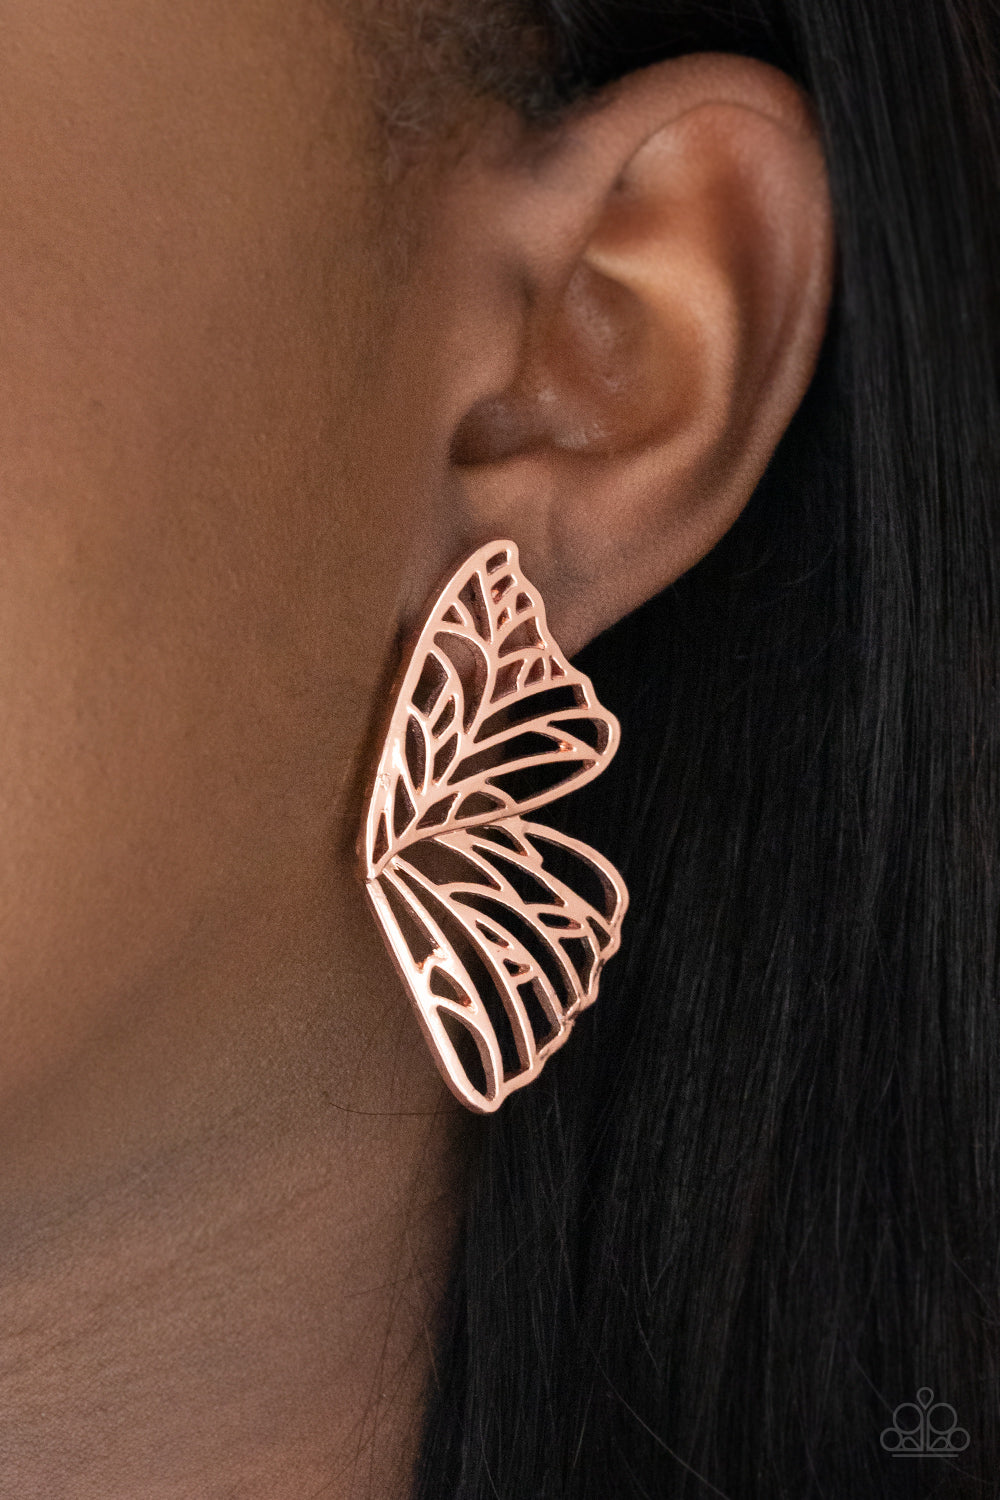 Butterfly Frills - Copper Earrings shiny copper bars delicately climb scalloped shiny copper frames, coalescing into a whimsical butterfly wing. Earring attaches to a standard post fitting.  Sold as one pair of post earrings.  Paparazzi Jewelry is lead and nickel free so it's perfect for sensitive skin too!